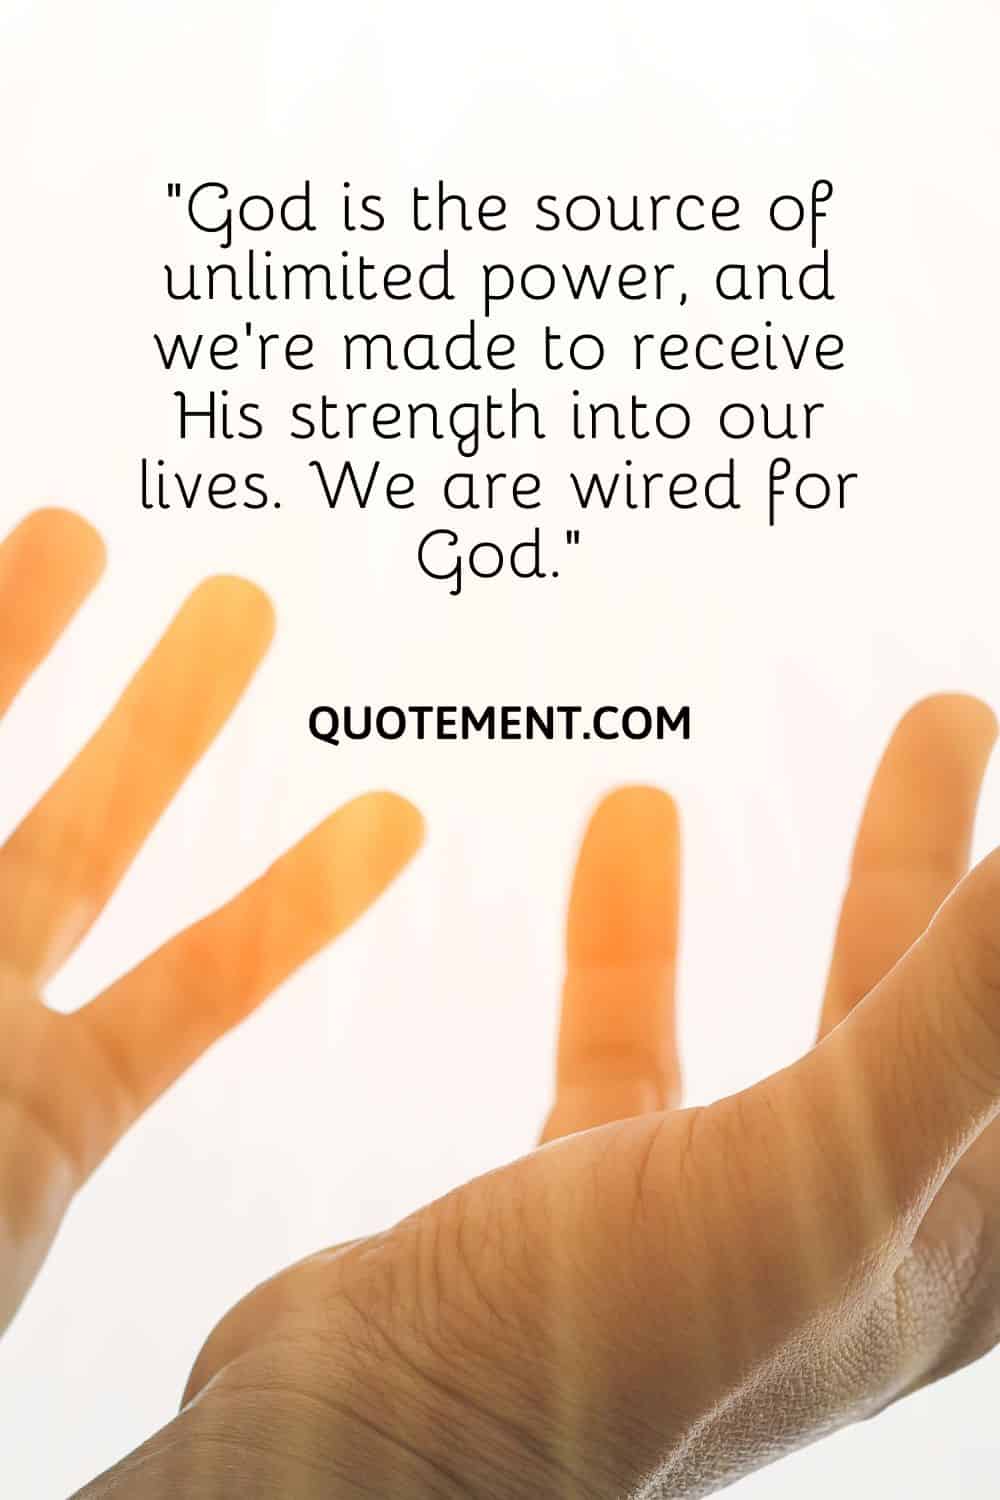 “God is the source of unlimited power, and we’re made to receive His strength into our lives. We are wired for God.”